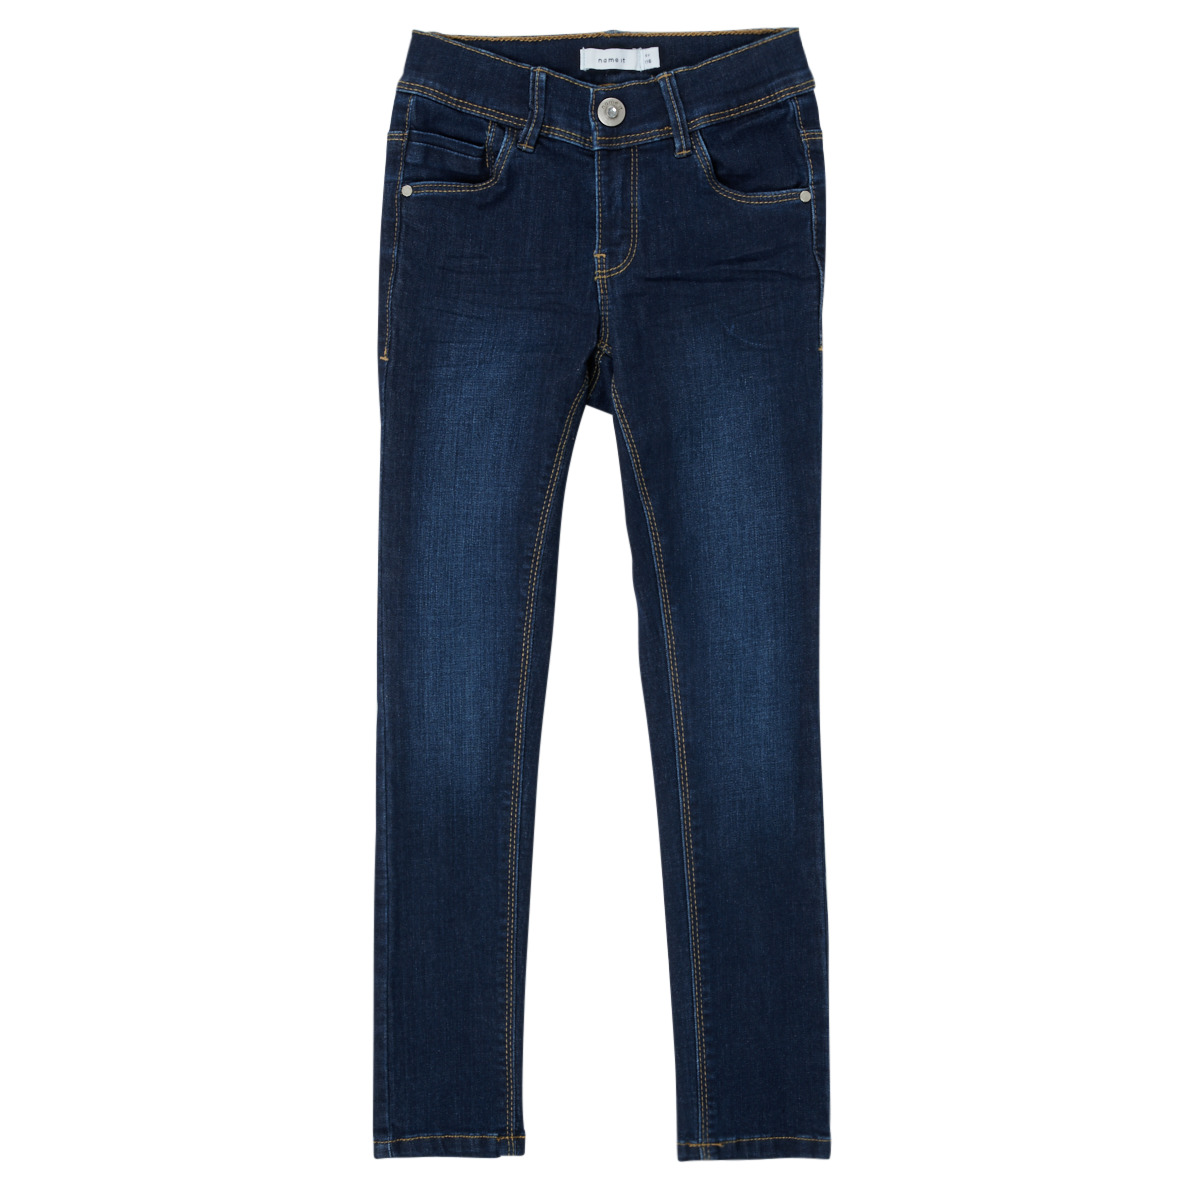 jeans - ! Clothing NKFPOLLY it delivery | DNMATASI - Blue NET Free Spartoo Name slim Child